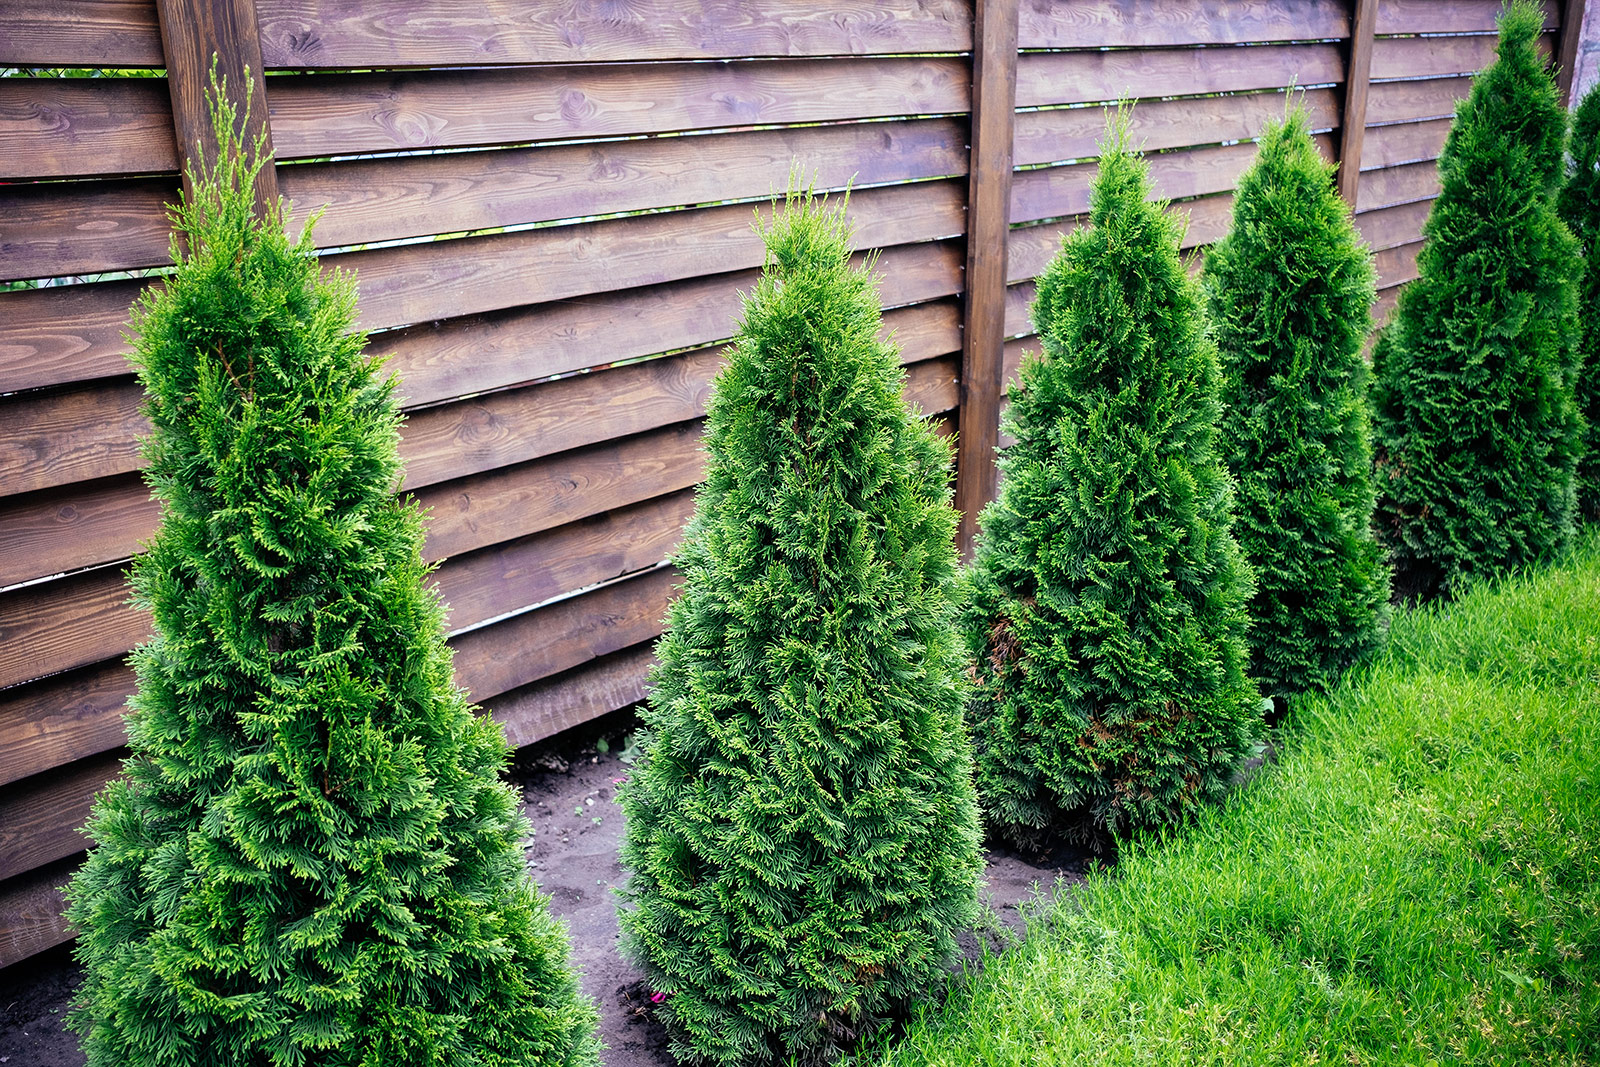 Fast-growing arborvitae trees for privacy screening